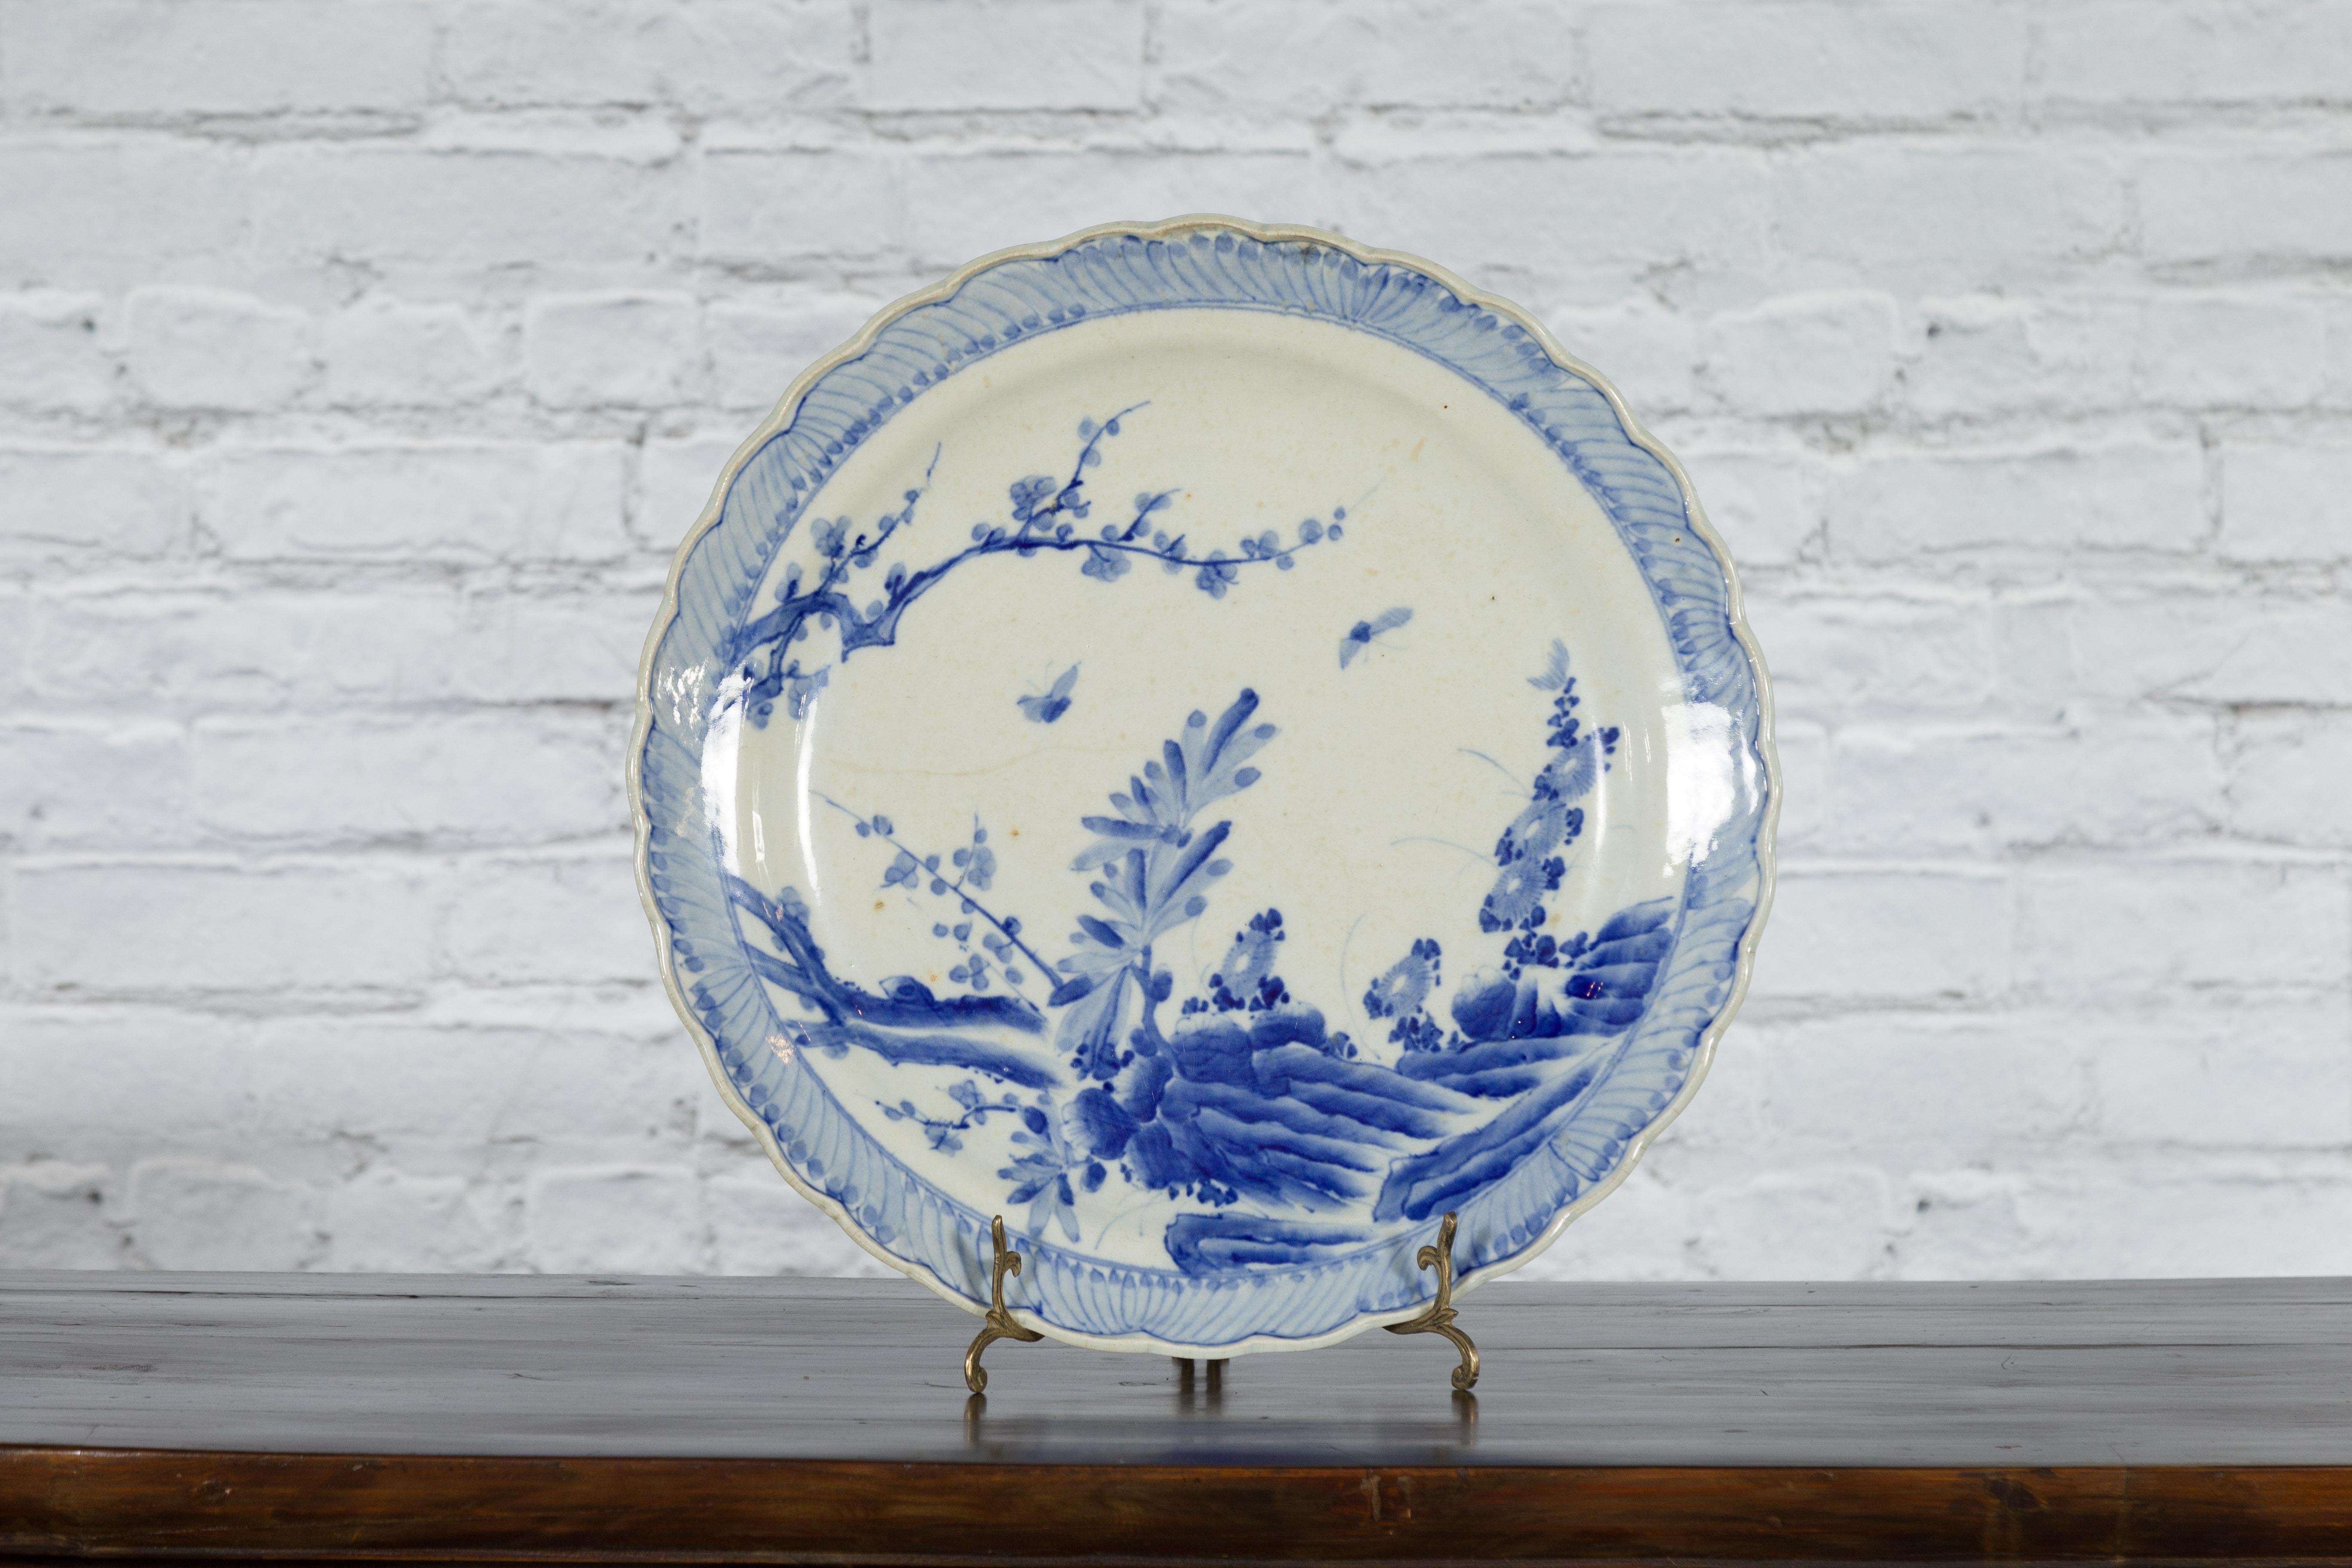 19th Century Japanese Blue and White Hand-Painted Porcelain Charger Plate with Foliage Décor For Sale